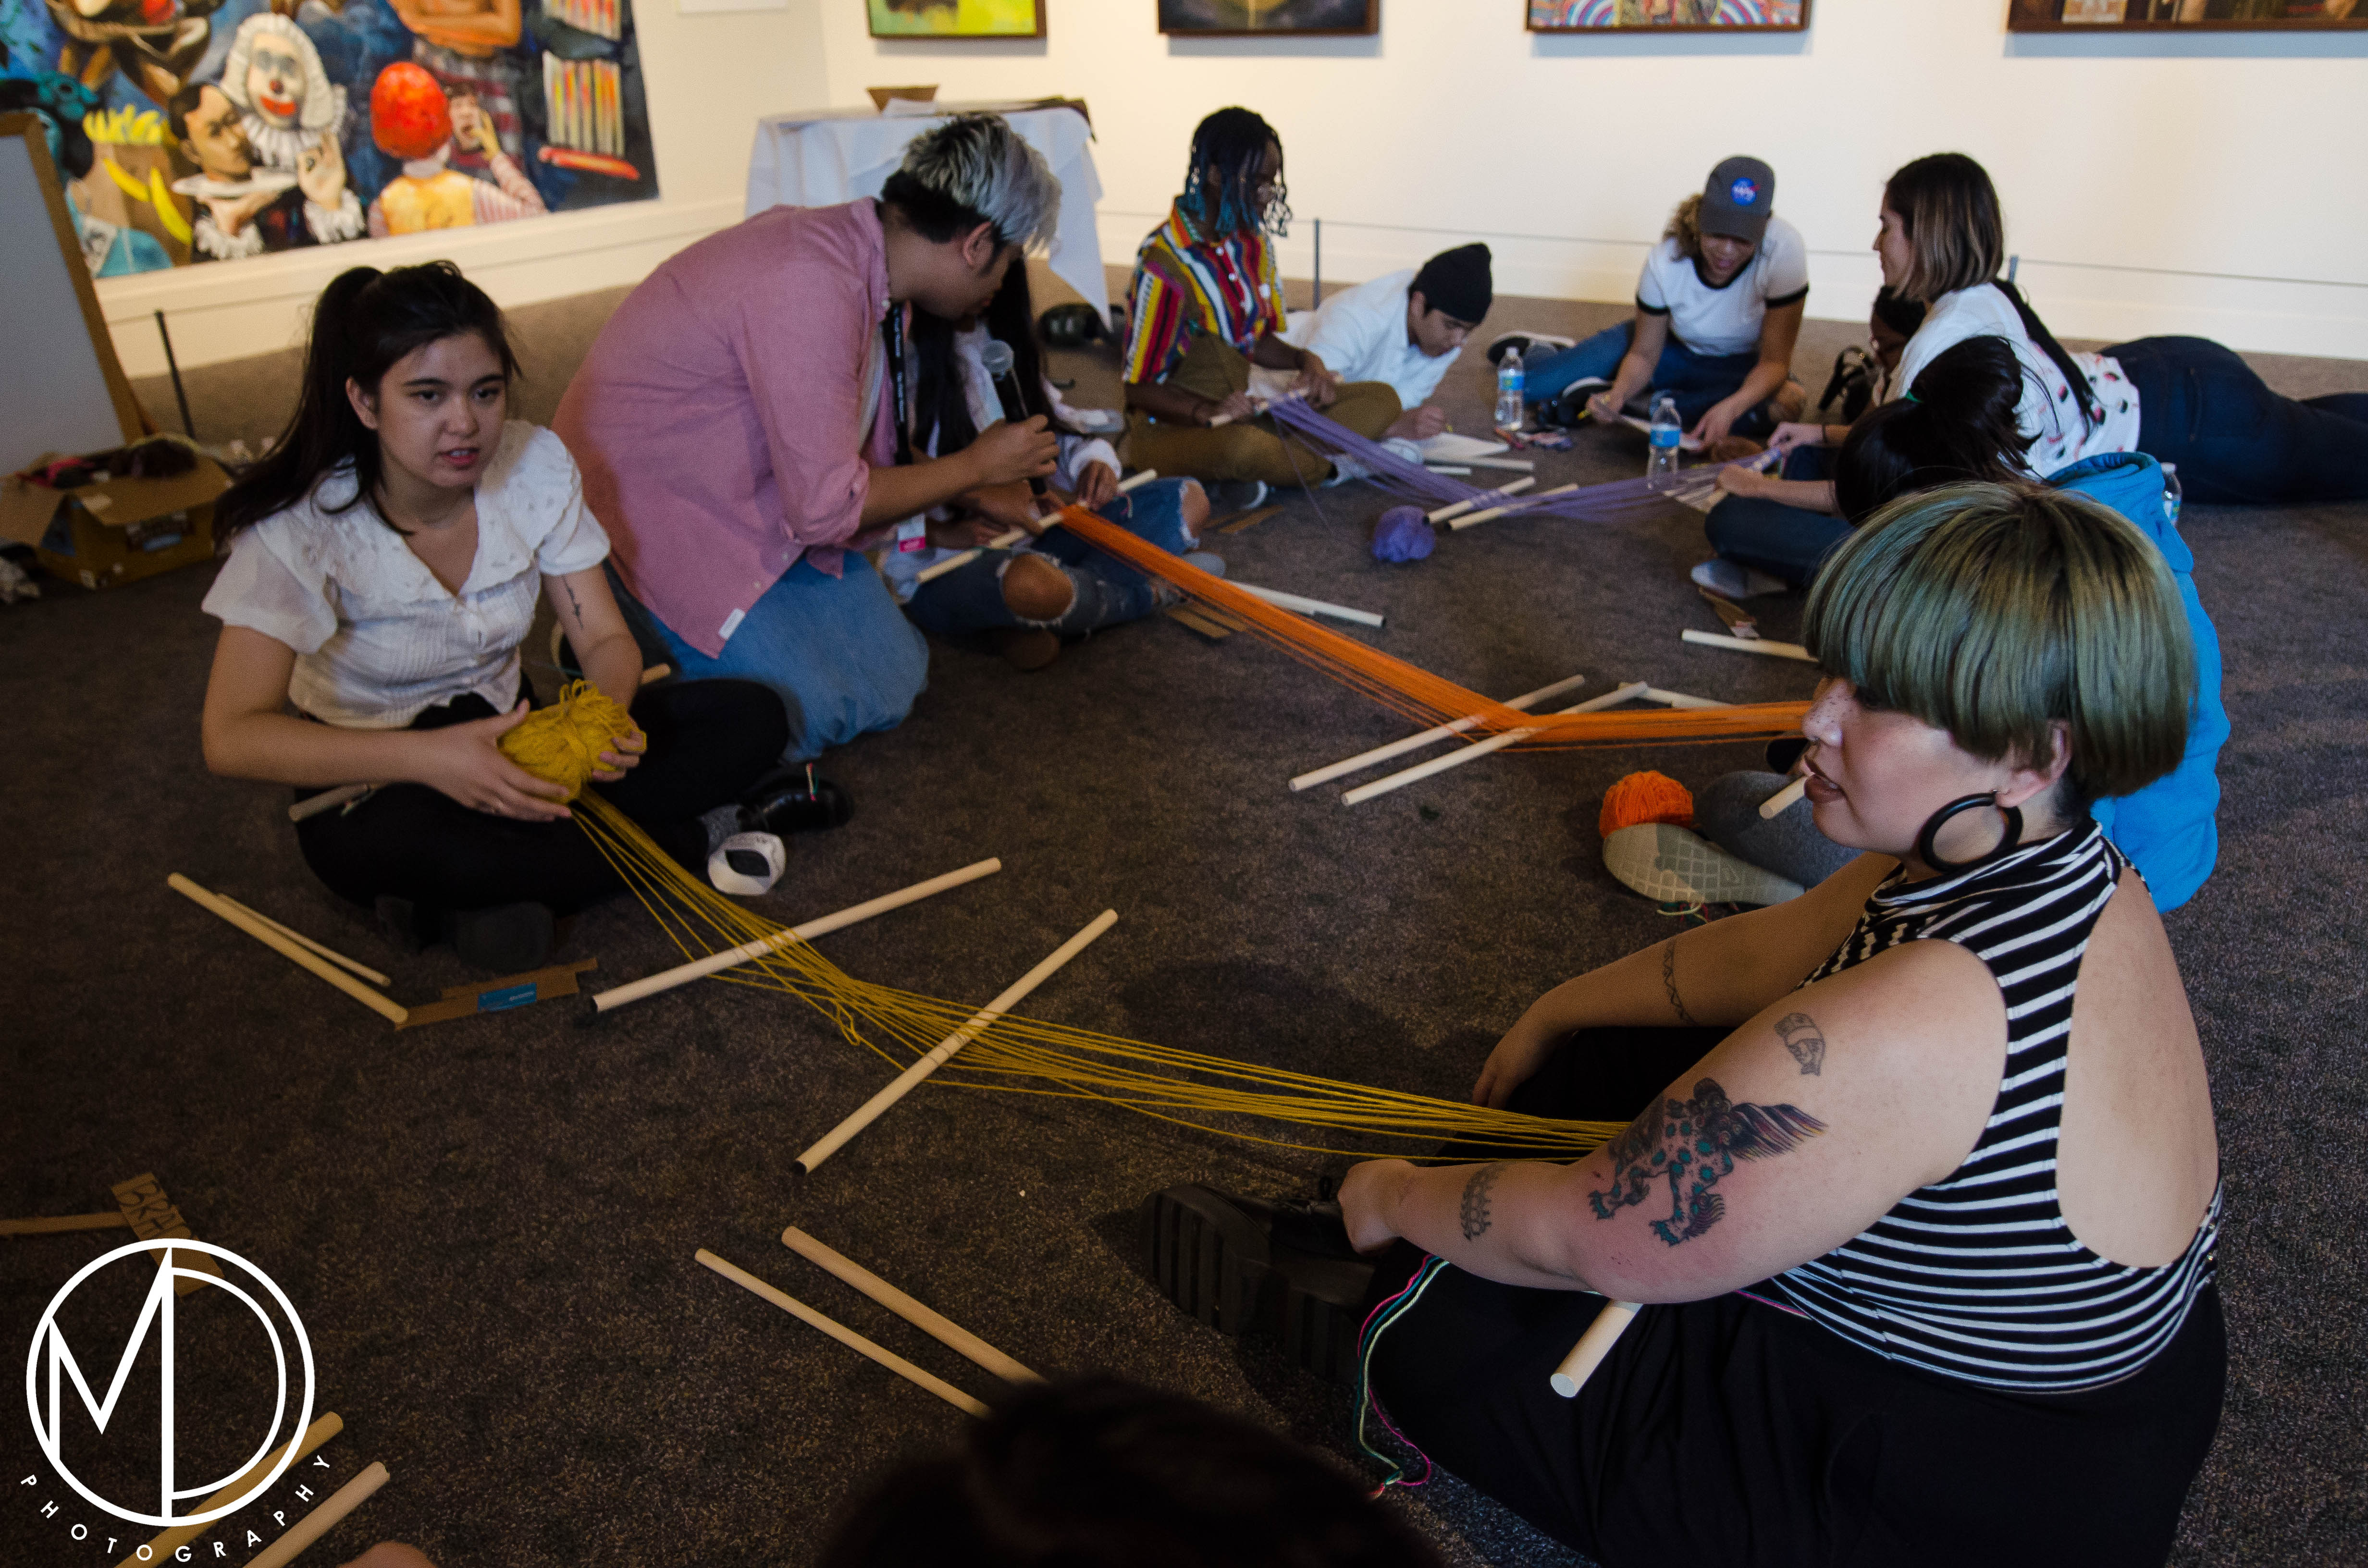 Loren Ibach and Avigail Bautista teaching guests about weaving with a backstrap loom. (c) Field Museum of Natural History - CC BY-NC 4.0